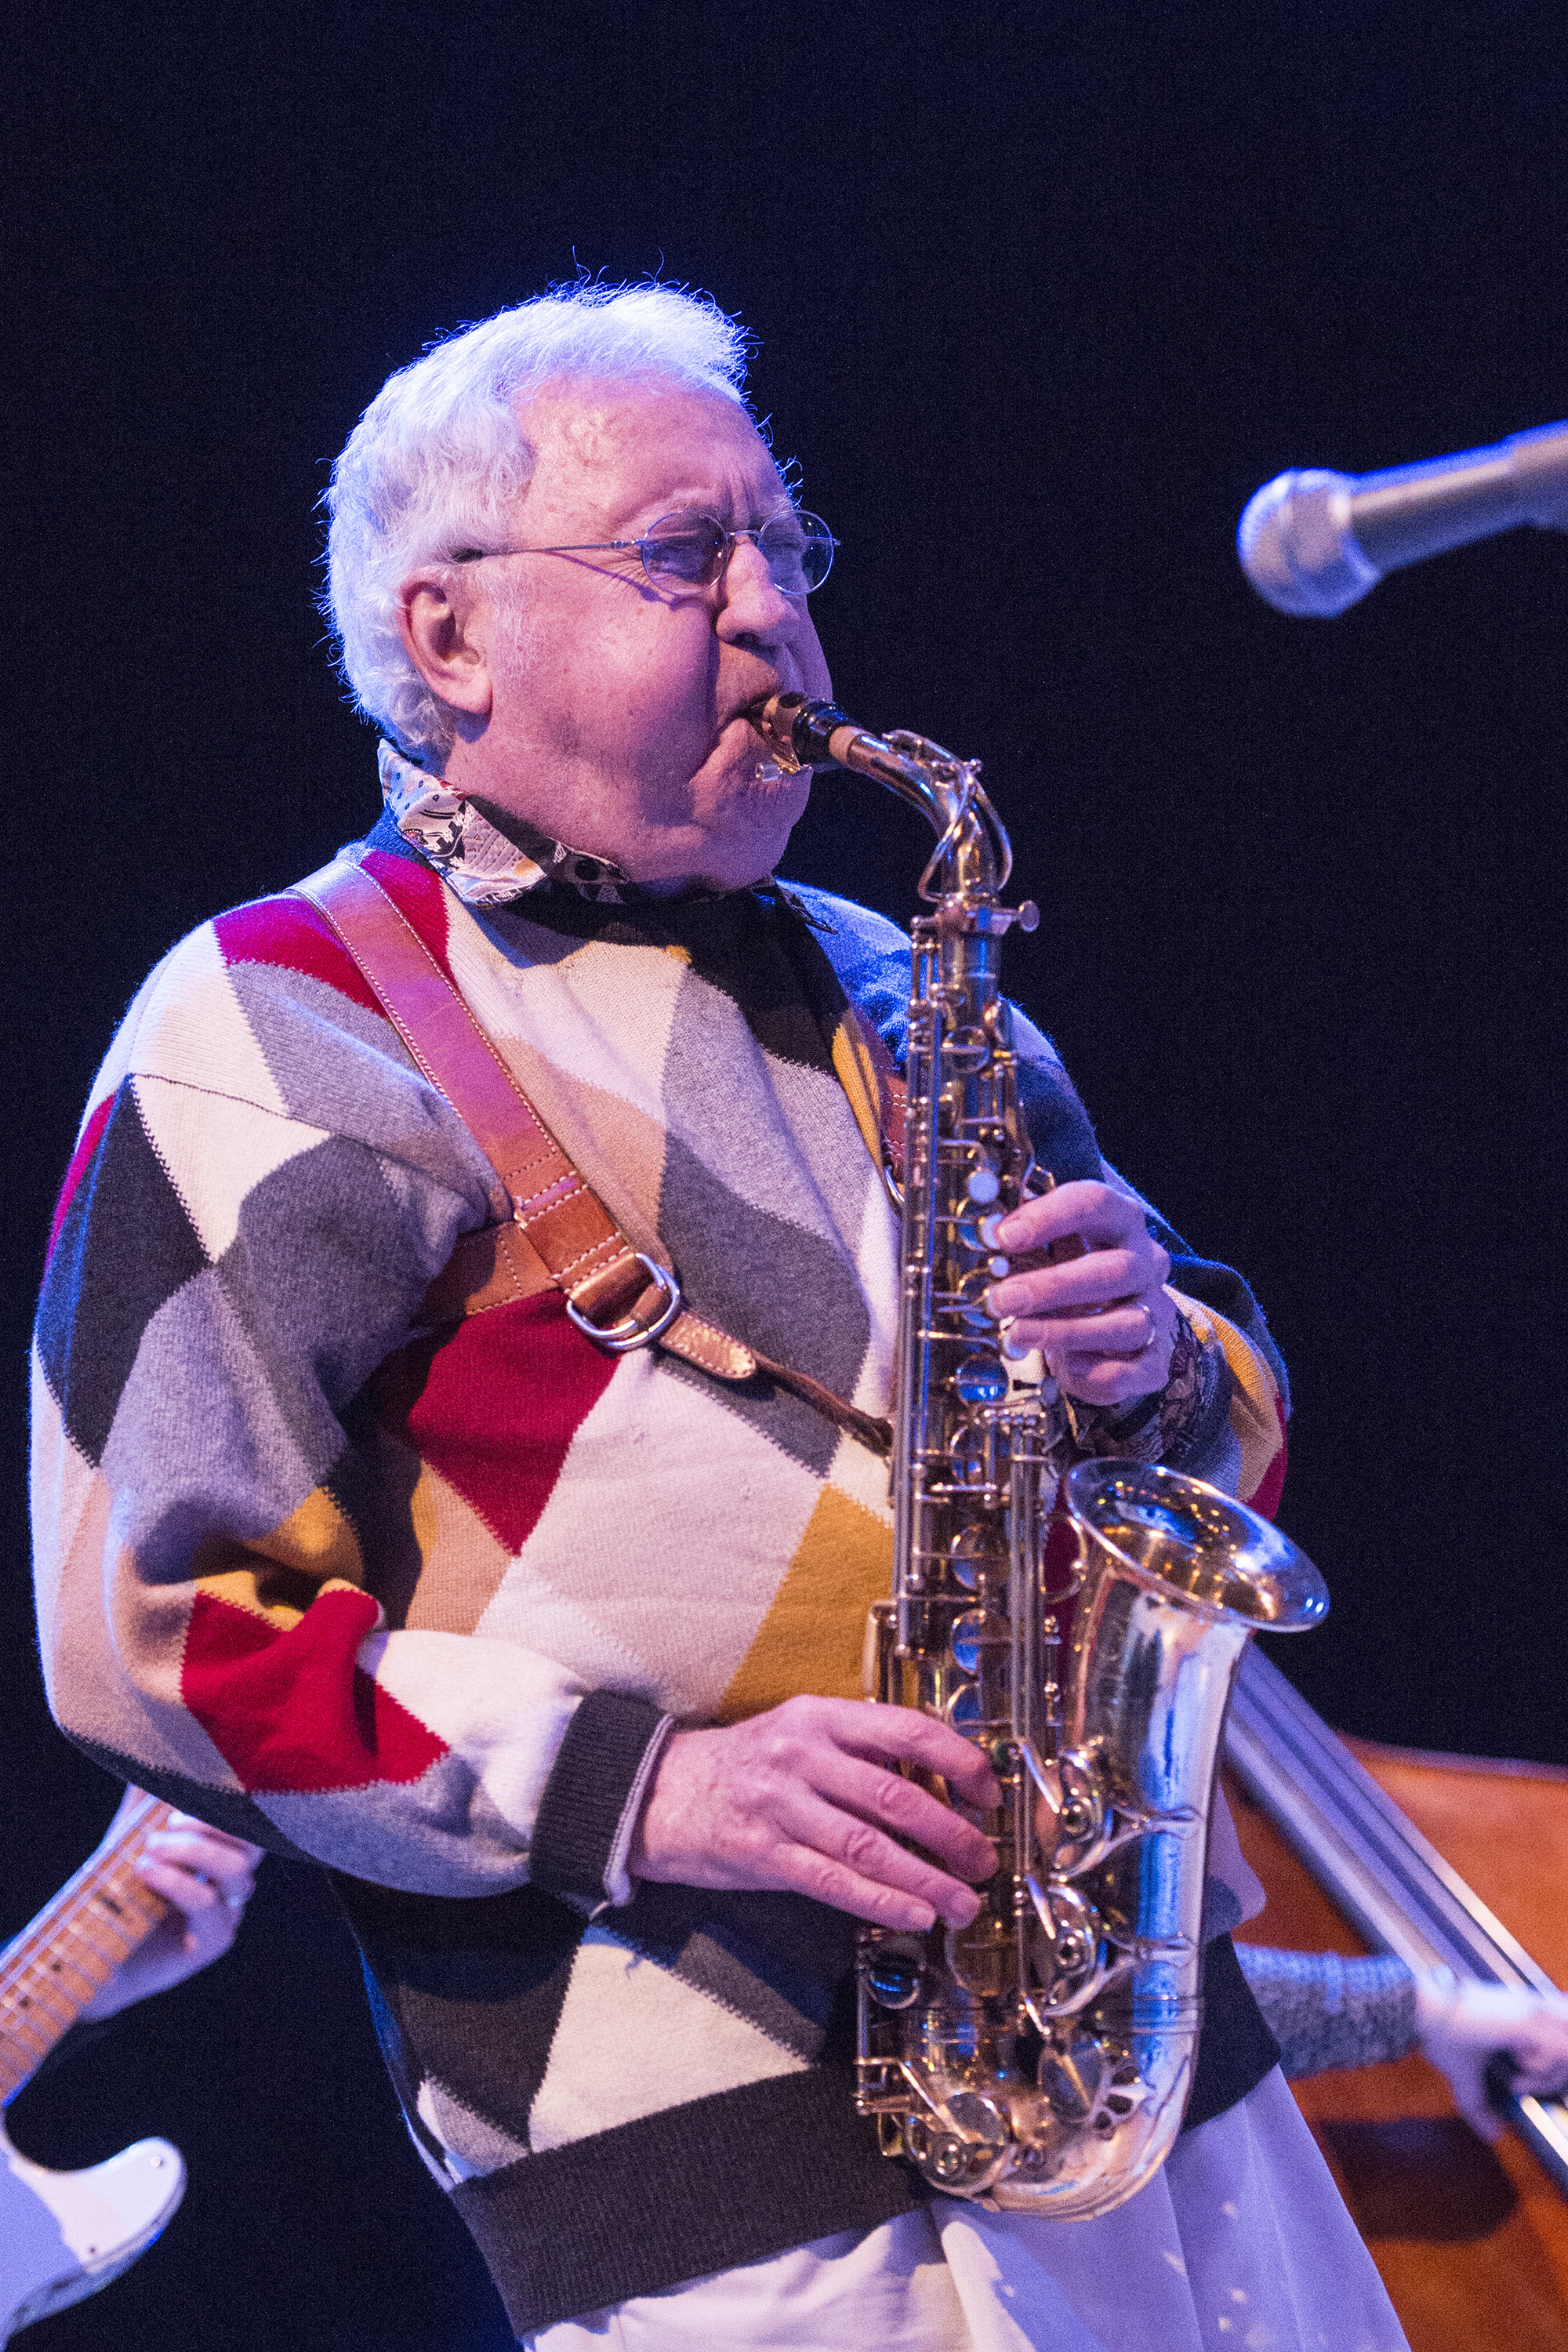 <p>Celebrated jazz saxophonist Lee Konitz died from pneumonia related to COVID-19 on April 15. He was 92. The musician, whose career lasted for seven decades, was the last surviving performer on Miles Davis' landmark "Birth of the Cool" album, Billboard reported.</p>